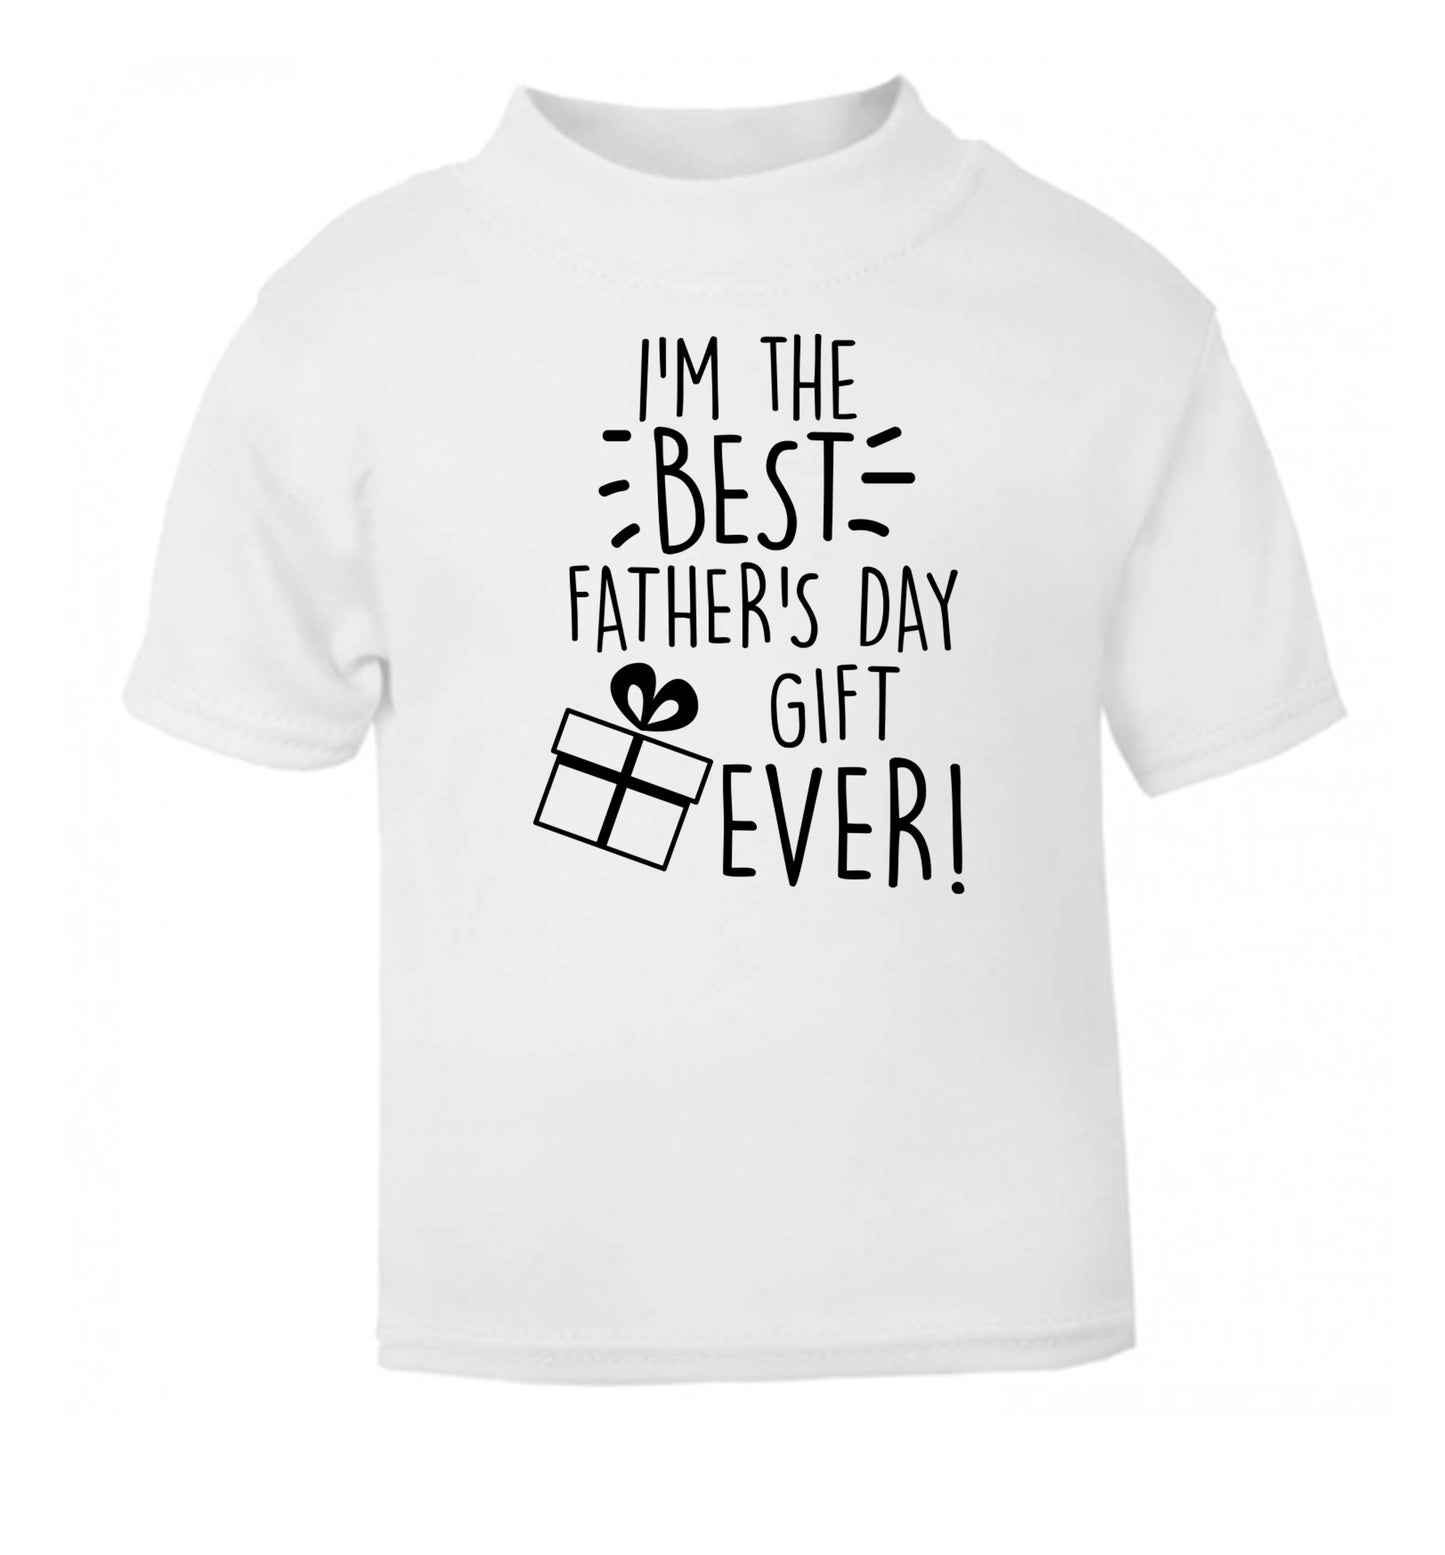 I'm the BEST father's day gift ever! white Baby Toddler Tshirt 2 Years